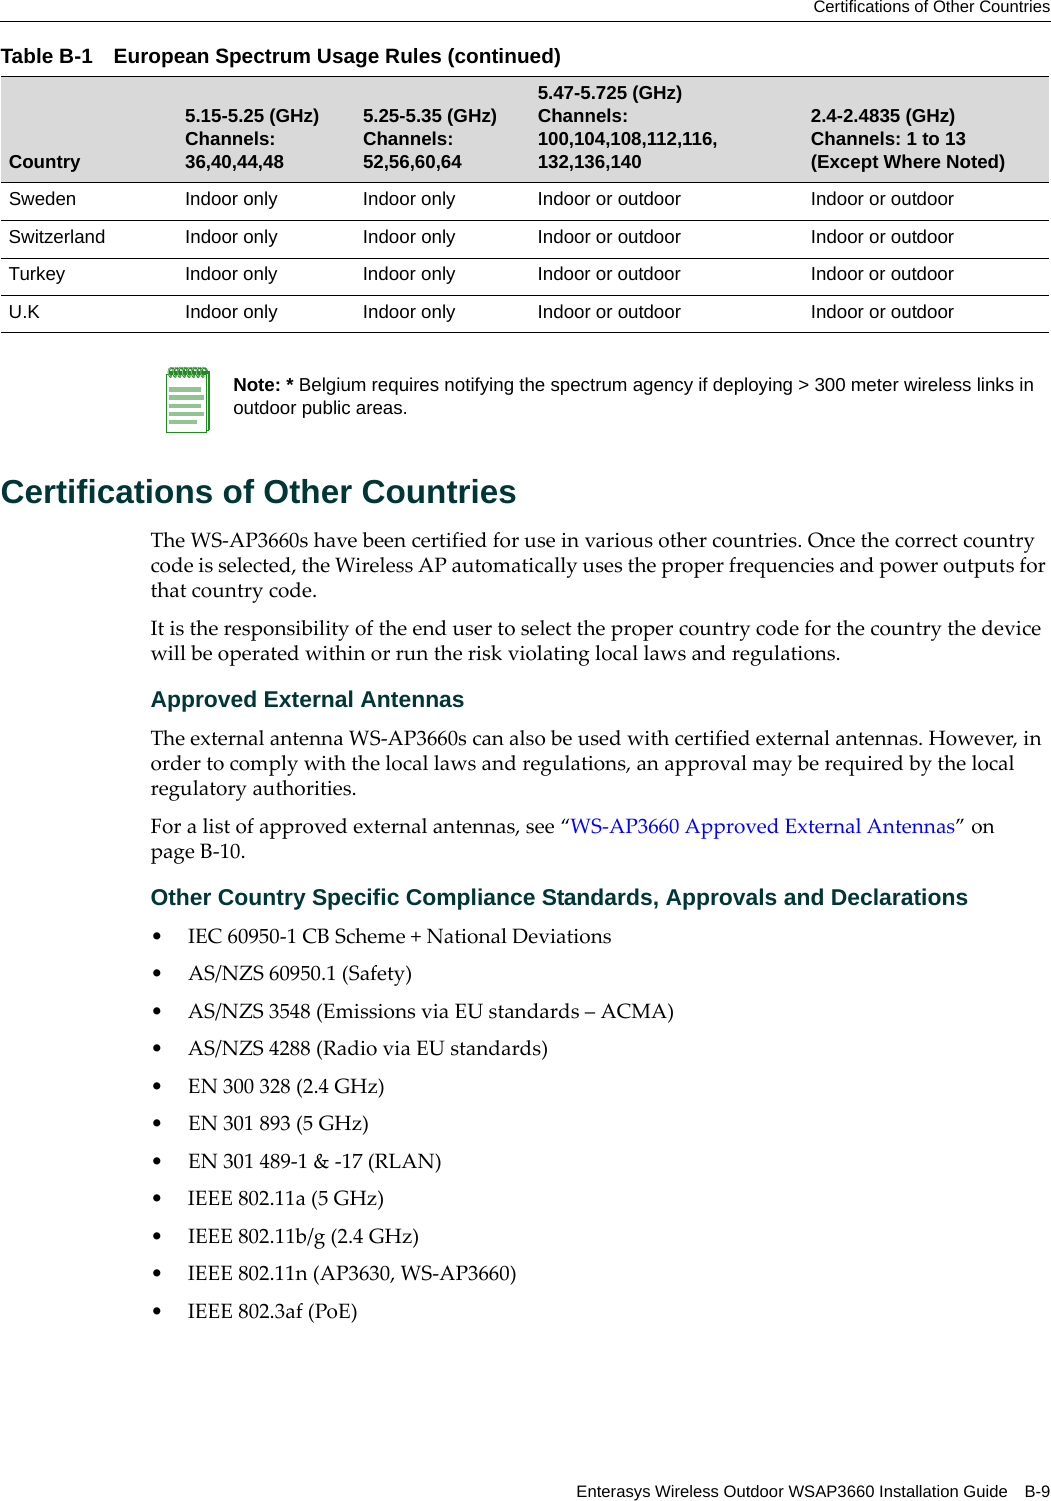 Certifications of Other CountriesEnterasys Wireless Outdoor WSAP3660 Installation Guide B-9Certifications of Other Countries The WS-AP3660s have been certified for use in various other countries. Once the correct country code is selected, the Wireless AP automatically uses the proper frequencies and power outputs for that country code.It is the responsibility of the end user to select the proper country code for the country the device will be operated within or run the risk violating local laws and regulations.Approved External AntennasThe external antenna WS-AP3660s can also be used with certified external antennas. However, in order to comply with the local laws and regulations, an approval may be required by the local regulatory authorities.For a list of approved external antennas, see “WS-AP3660 Approved External Antennas” on page B-10.Other Country Specific Compliance Standards, Approvals and Declarations• IEC 60950-1 CB Scheme + National Deviations• AS/NZS 60950.1 (Safety)• AS/NZS 3548 (Emissions via EU standards – ACMA)• AS/NZS 4288 (Radio via EU standards)• EN 300 328 (2.4 GHz)• EN 301 893 (5 GHz)• EN 301 489-1 &amp; -17 (RLAN)• IEEE 802.11a (5 GHz)• IEEE 802.11b/g (2.4 GHz)• IEEE 802.11n (AP3630, WS-AP3660)• IEEE 802.3af (PoE)Sweden Indoor only Indoor only Indoor or outdoor Indoor or outdoorSwitzerland Indoor only Indoor only Indoor or outdoor Indoor or outdoorTurkey Indoor only Indoor only Indoor or outdoor Indoor or outdoorU.K Indoor only Indoor only Indoor or outdoor Indoor or outdoorTable B-1 European Spectrum Usage Rules (continued)Country5.15-5.25 (GHz) Channels: 36,40,44,485.25-5.35 (GHz)Channels: 52,56,60,645.47-5.725 (GHz)Channels: 100,104,108,112,116,132,136,1402.4-2.4835 (GHz)Channels: 1 to 13(Except Where Noted)Note: * Belgium requires notifying the spectrum agency if deploying &gt; 300 meter wireless links in outdoor public areas.